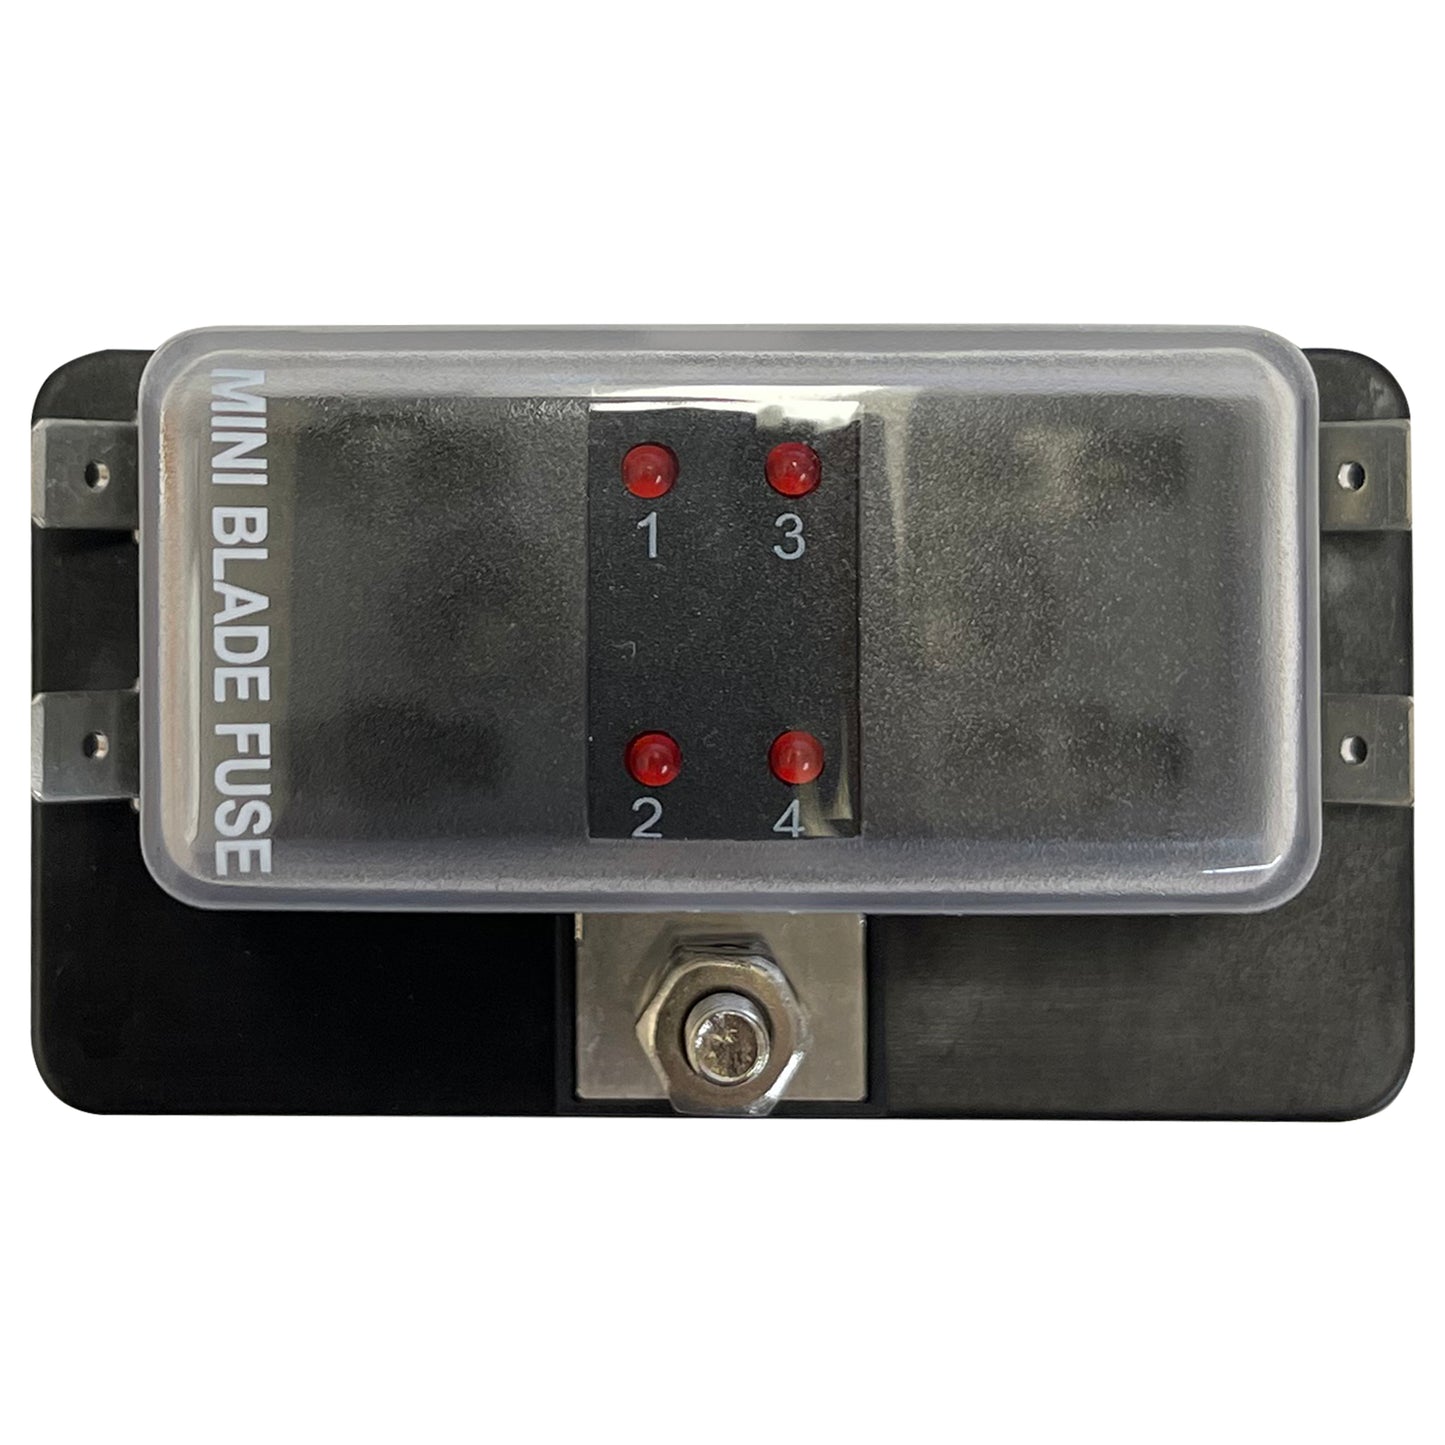 Fuse Block ATM With LED Indicators - 4 Position